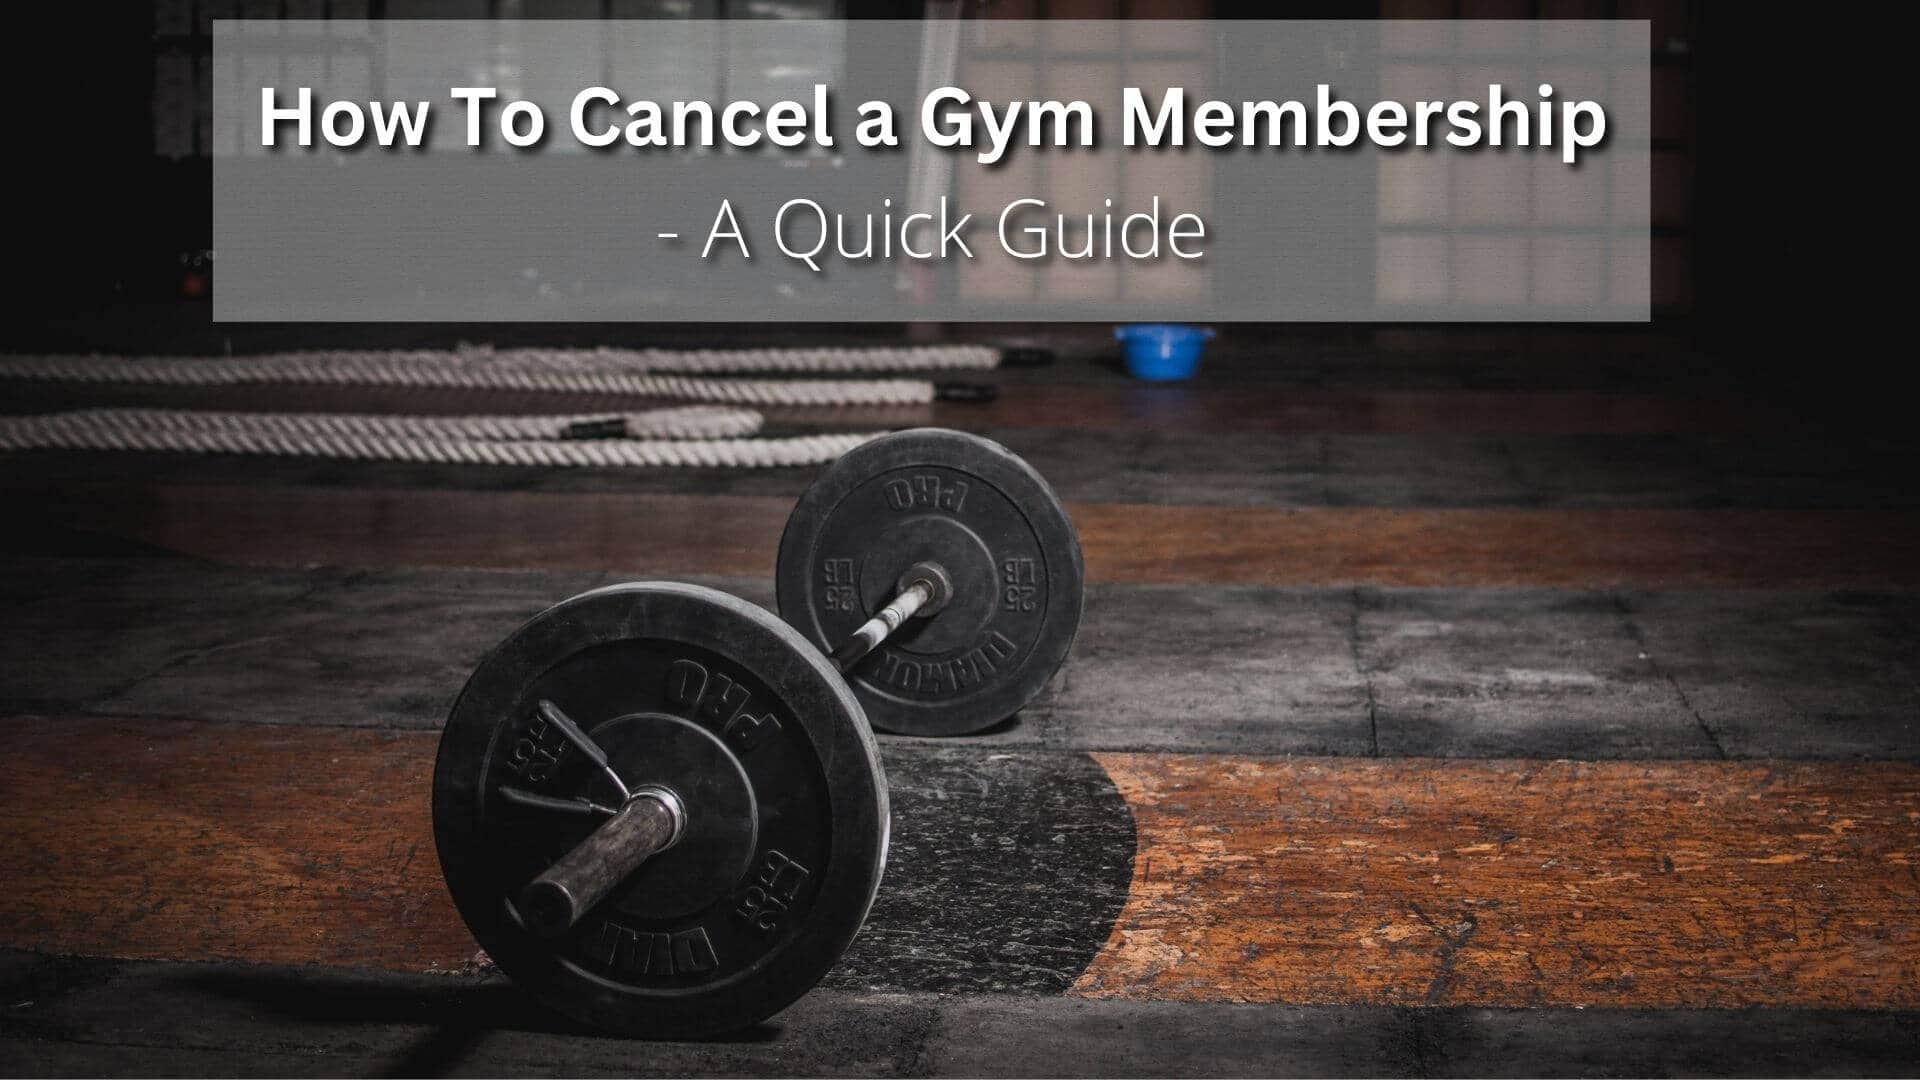 How to cancel my gym membership? Canceling membership is an intimidating and daunting task. Here are the steps for successful cancelation.